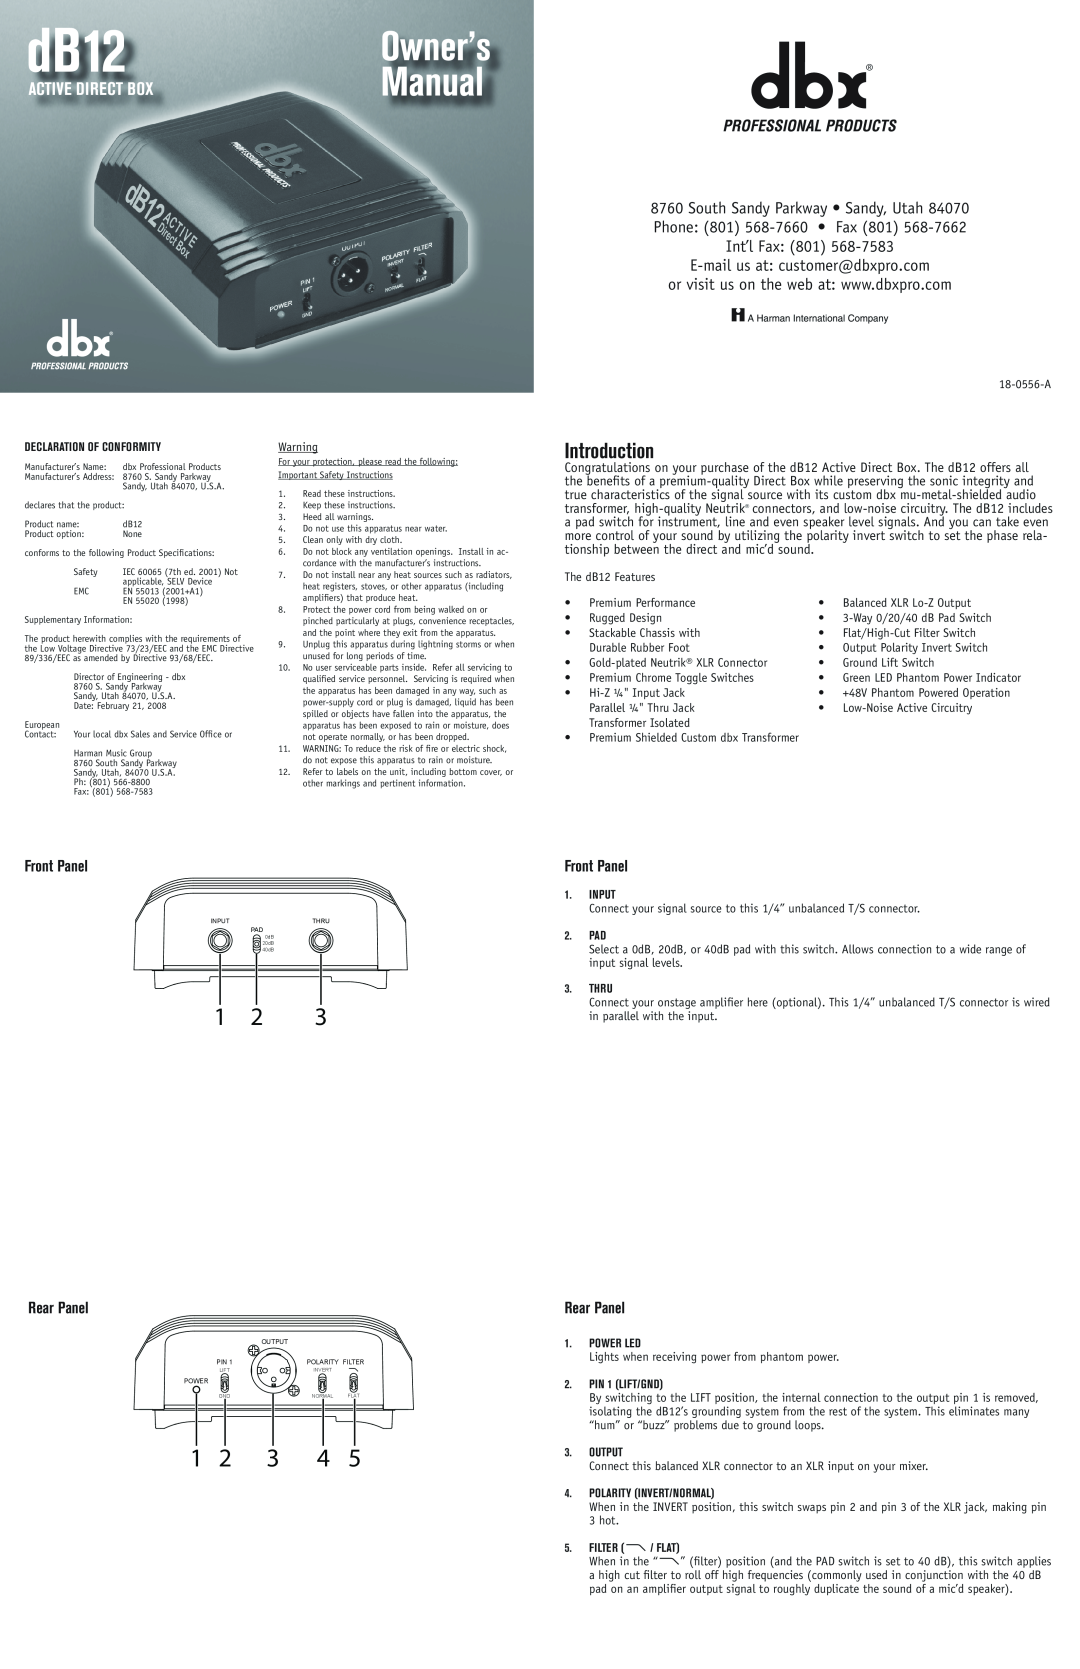 dbx Pro dB12 owner manual Introduction, Front Panel, Rear Panel, Manual, Owner’s, Active Direct Box, Input, Pad, Thru 